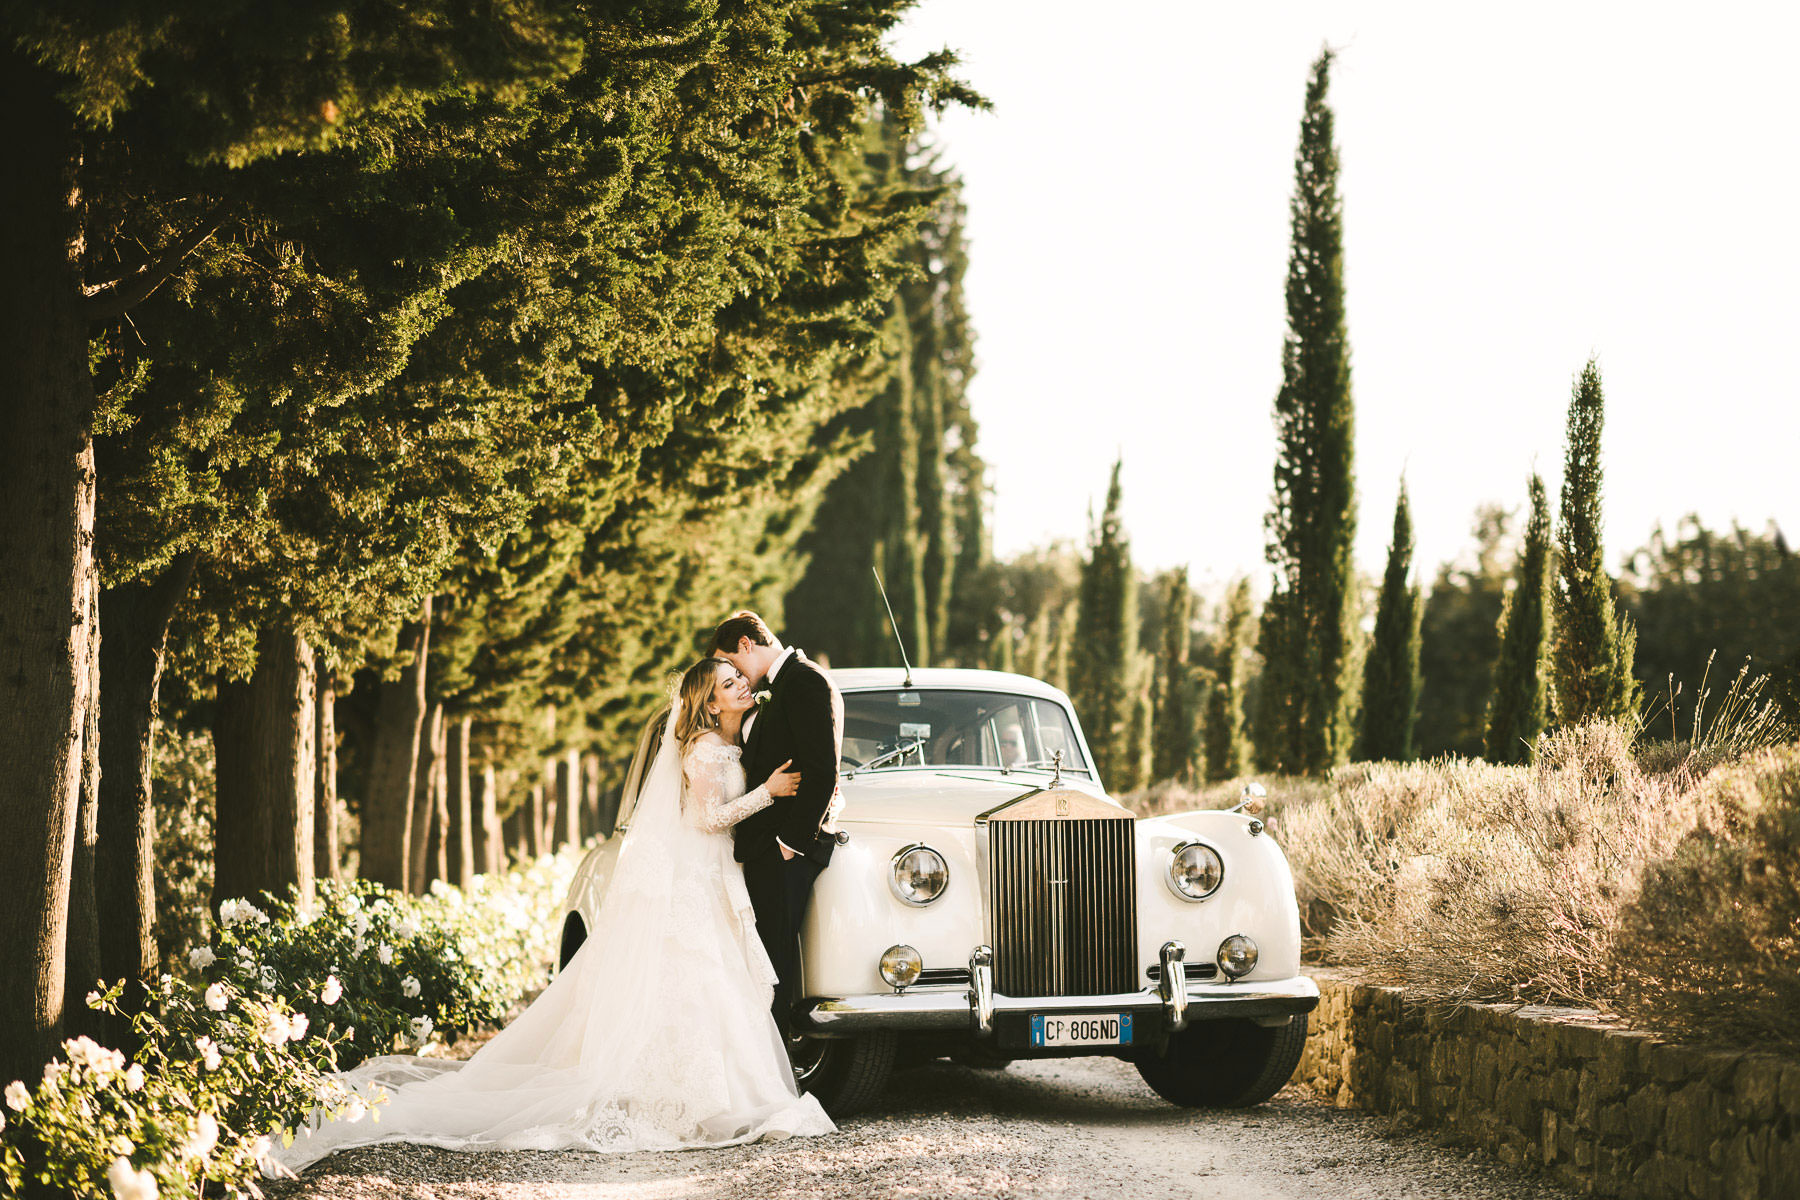 The timeless charm of a wedding in Tuscany, at Villa Mangiacane